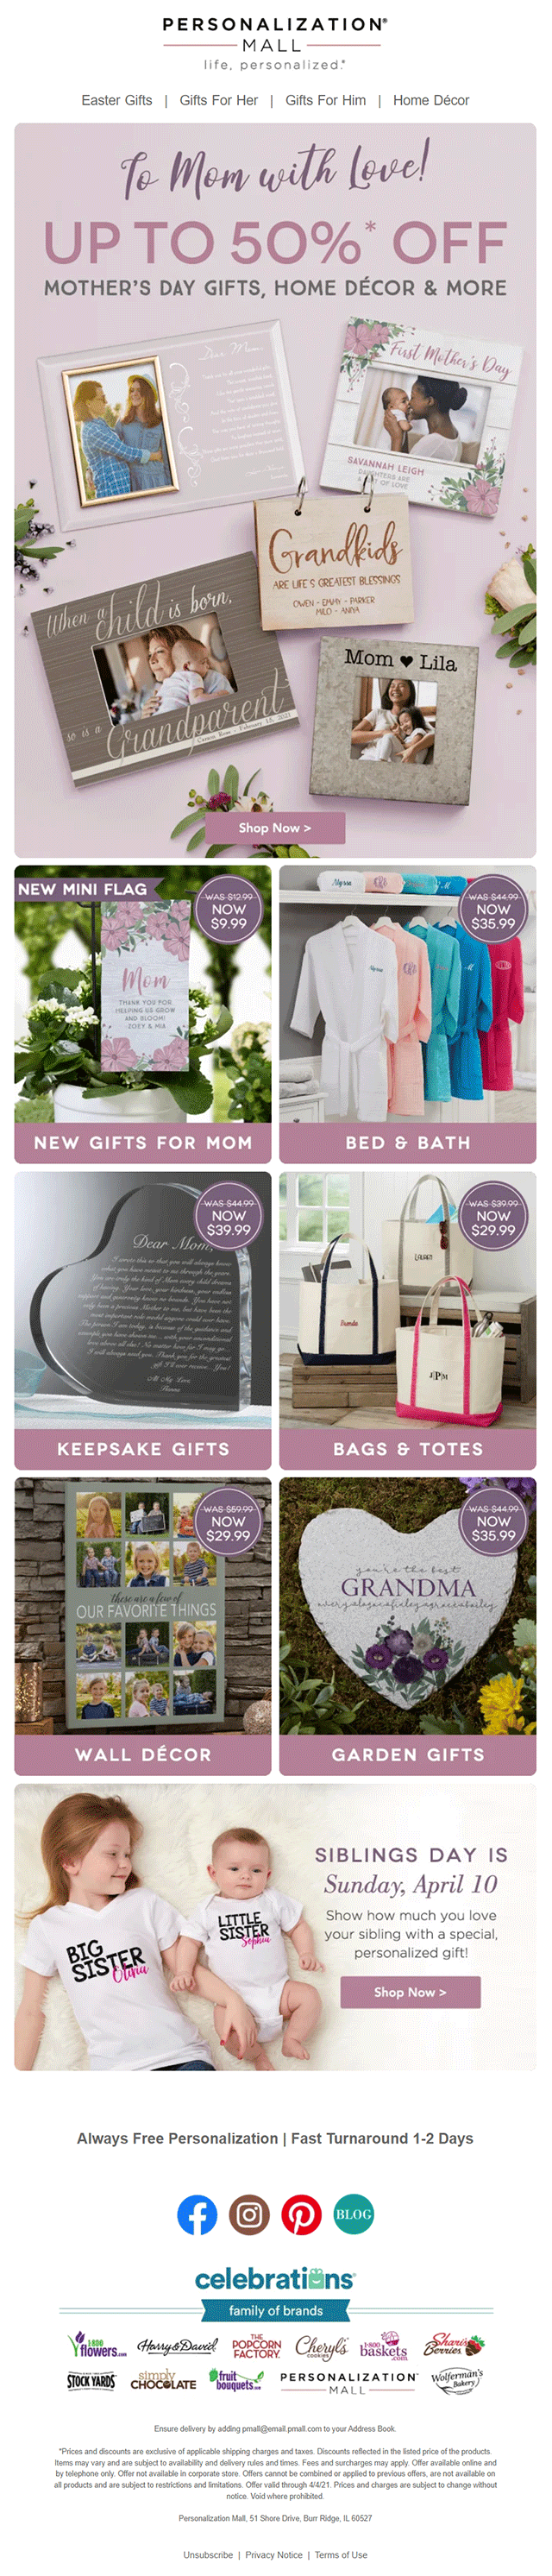 Personalization Mall -mother's day-email